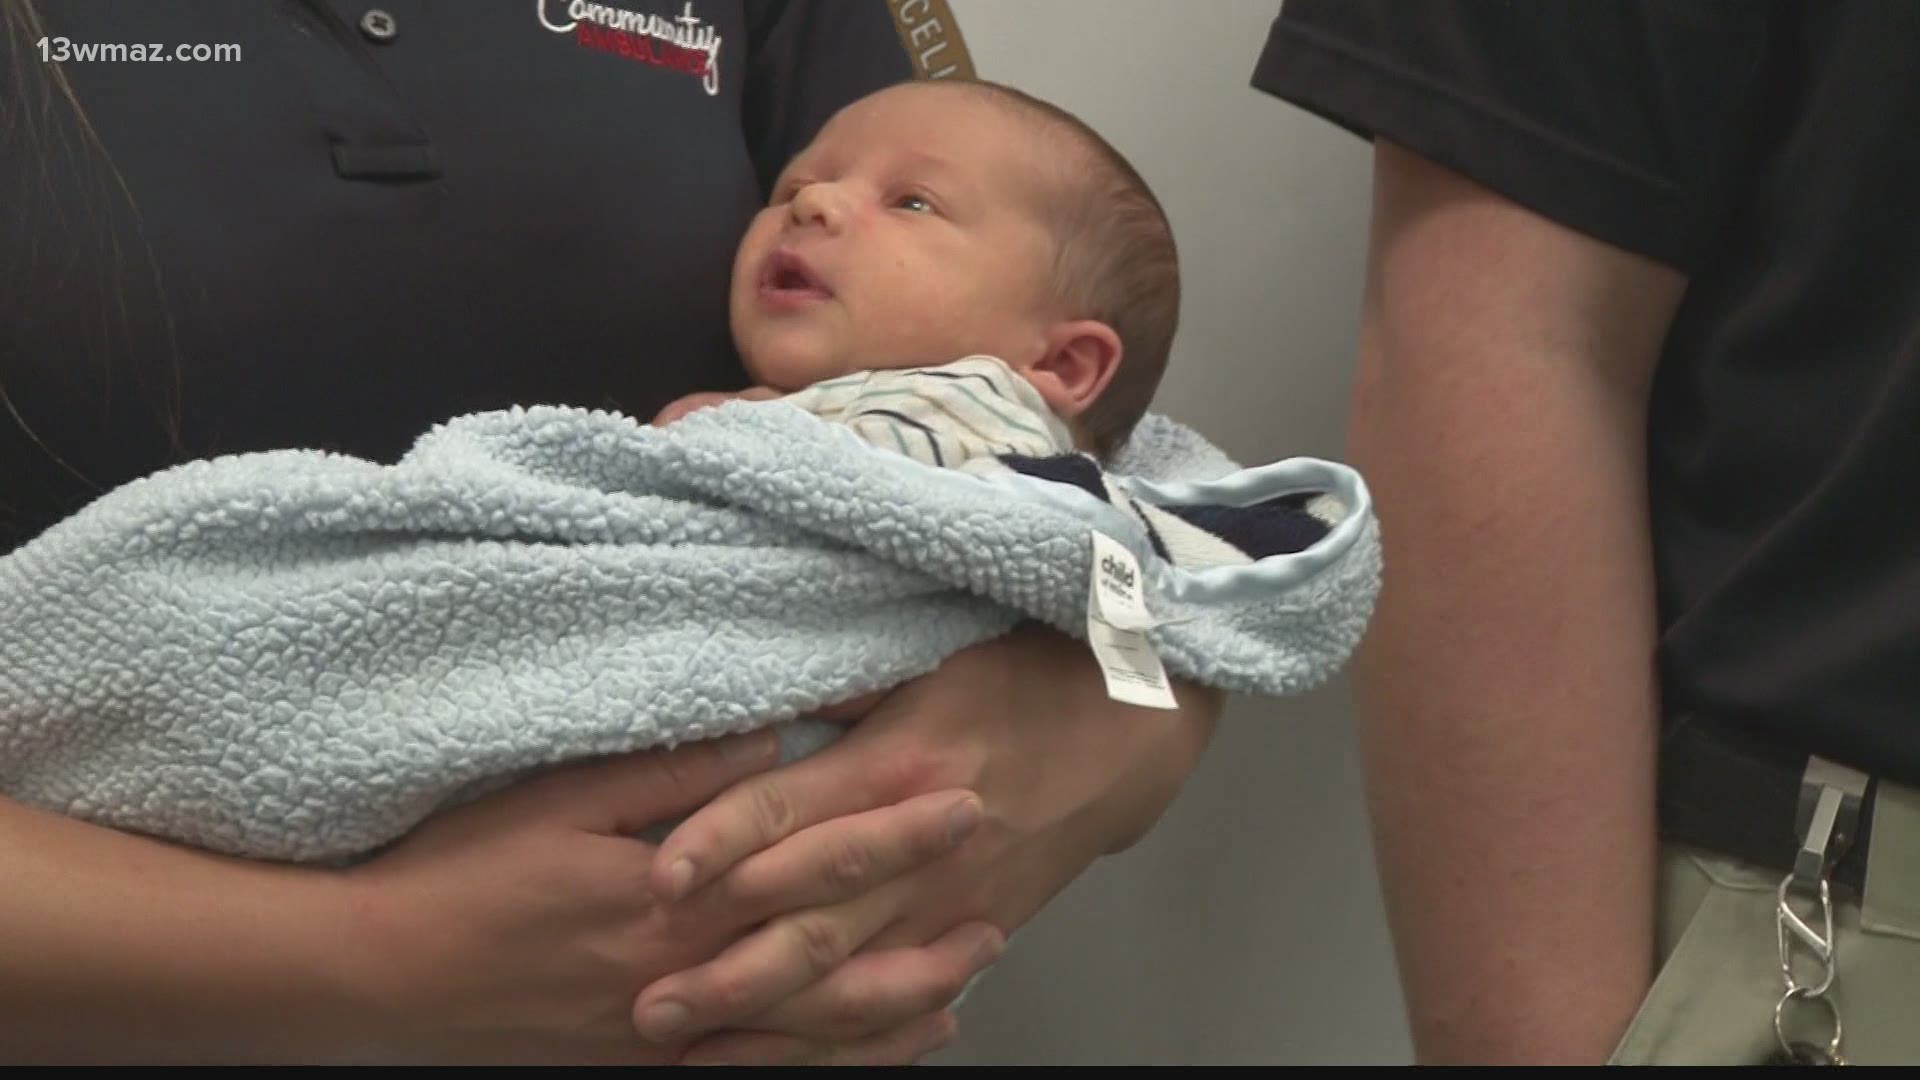 Thanks to one phone call with Community Ambulance, Christopher and Chasity Lester brought their baby into the world right at home